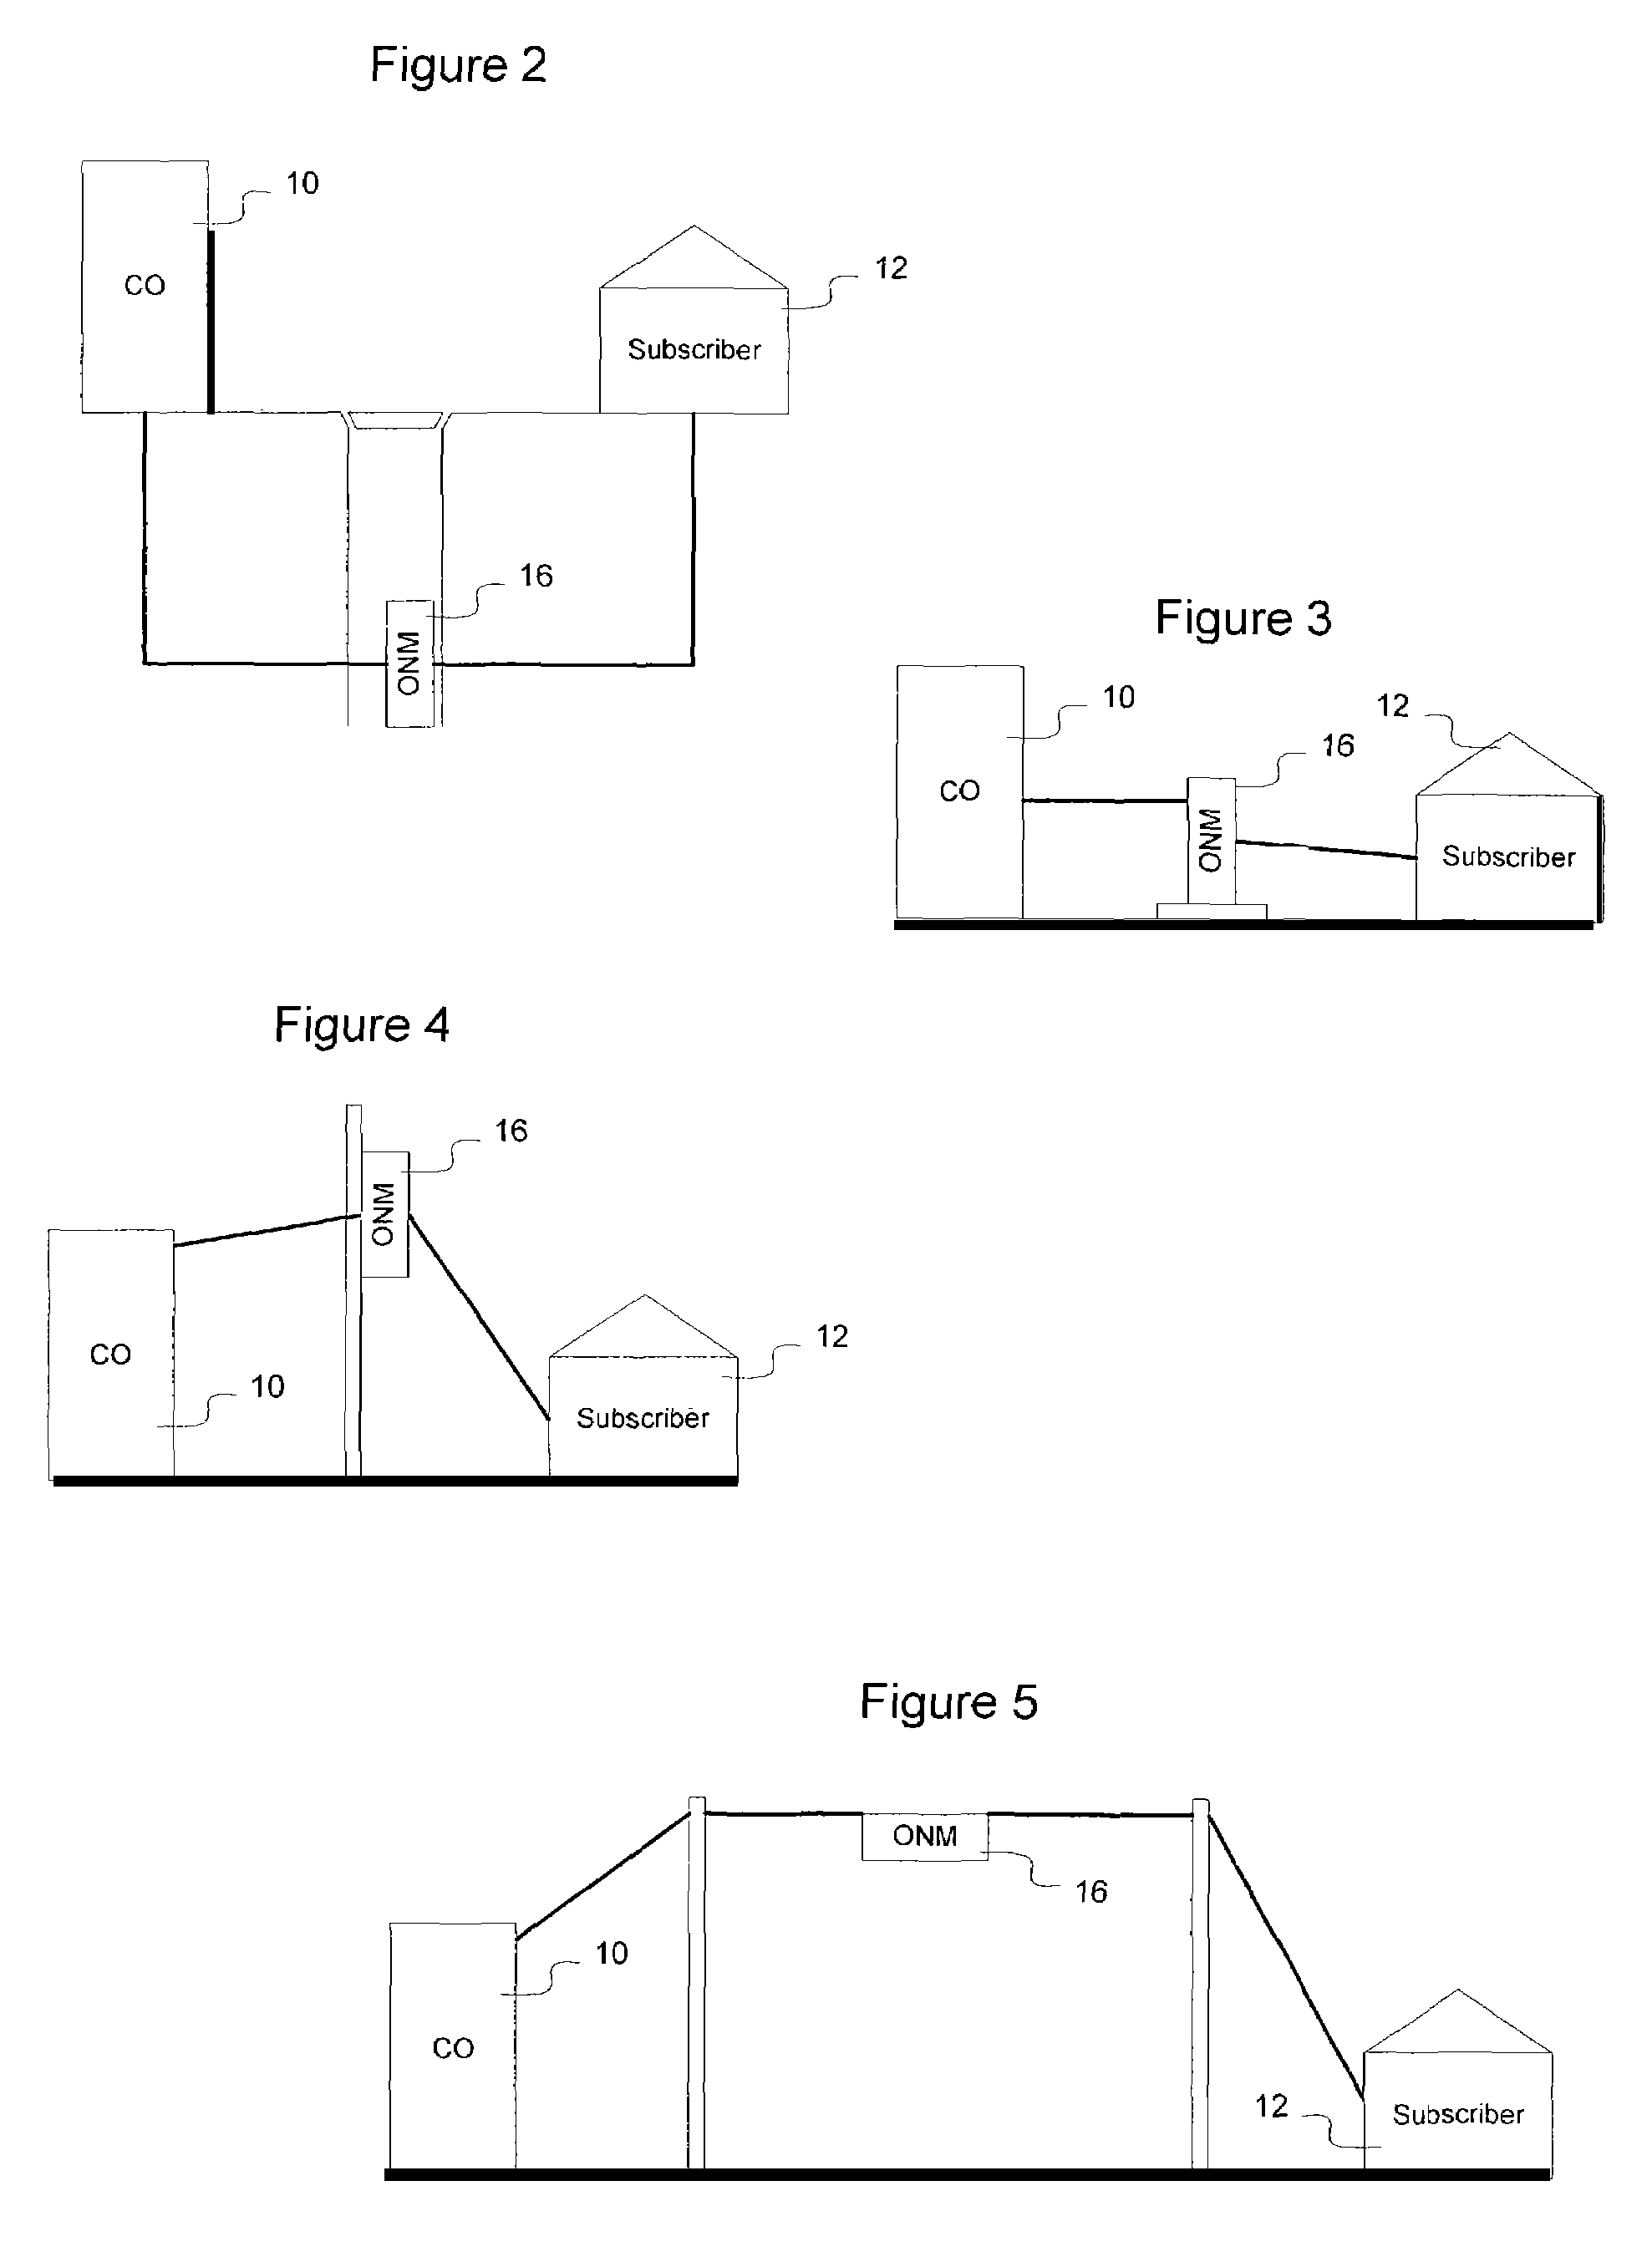 Remote interface for a network device in the physical plant